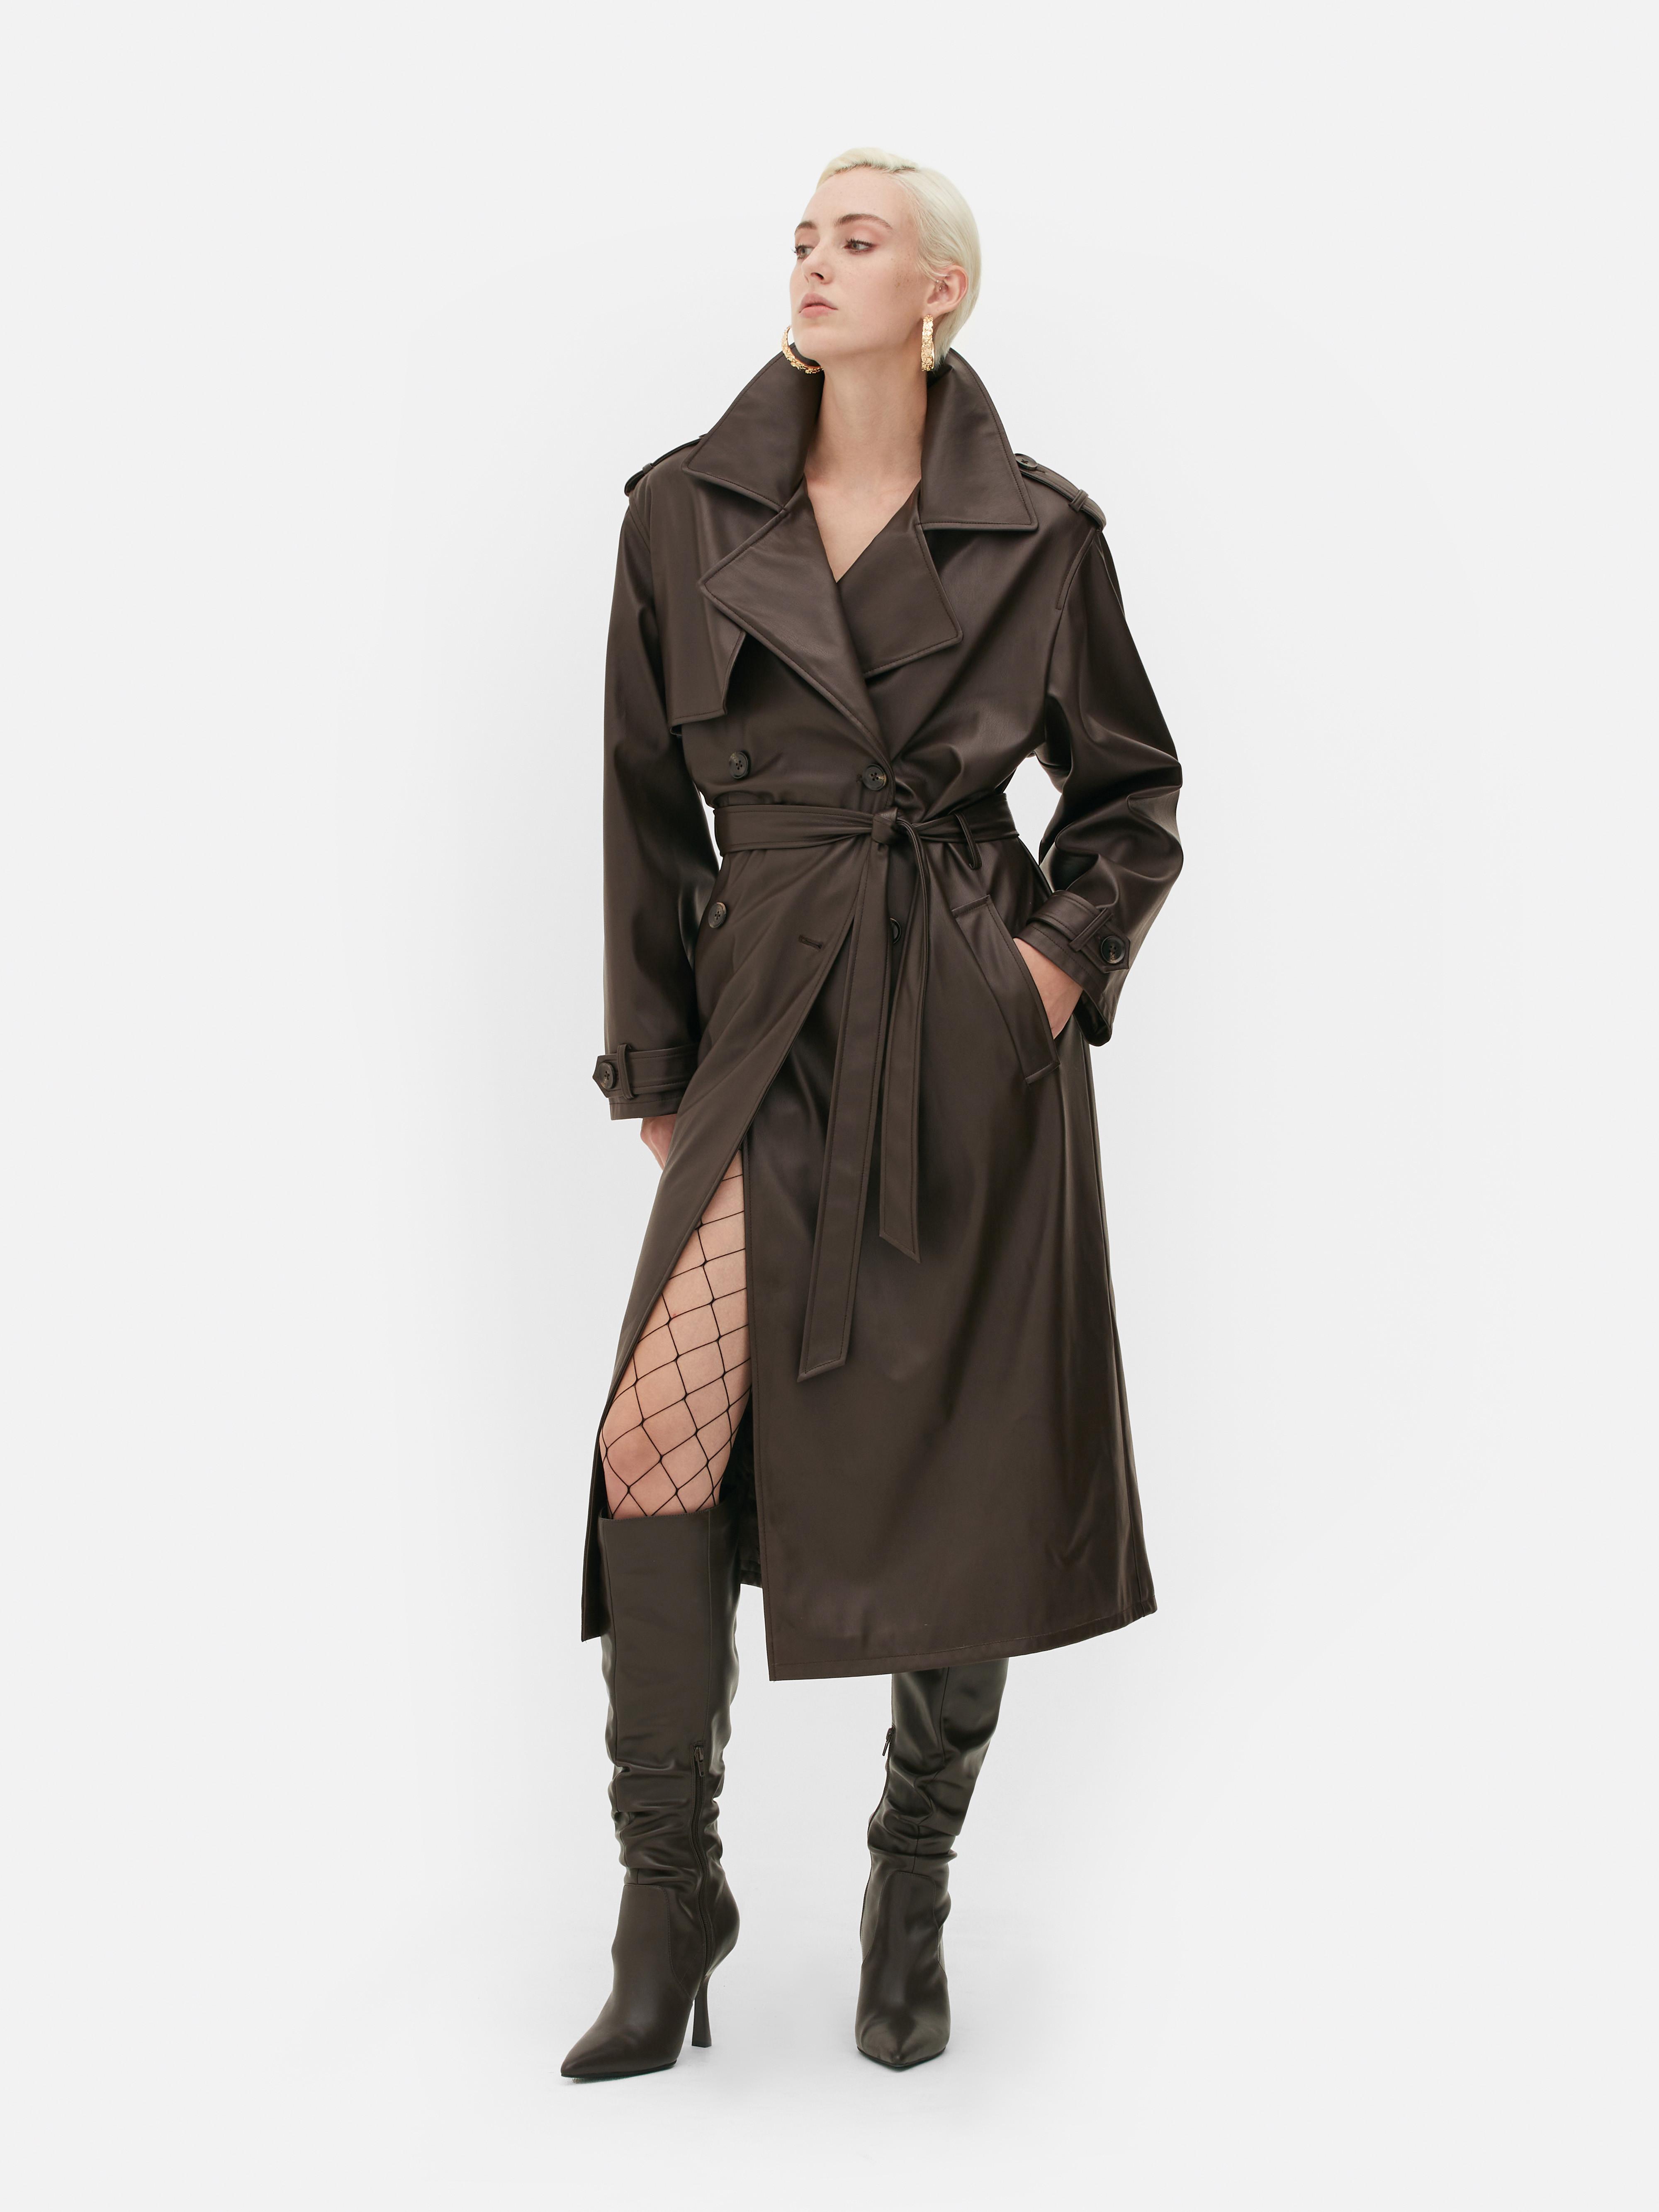 Rita Ora Oversized Faux Leather Trench Coat